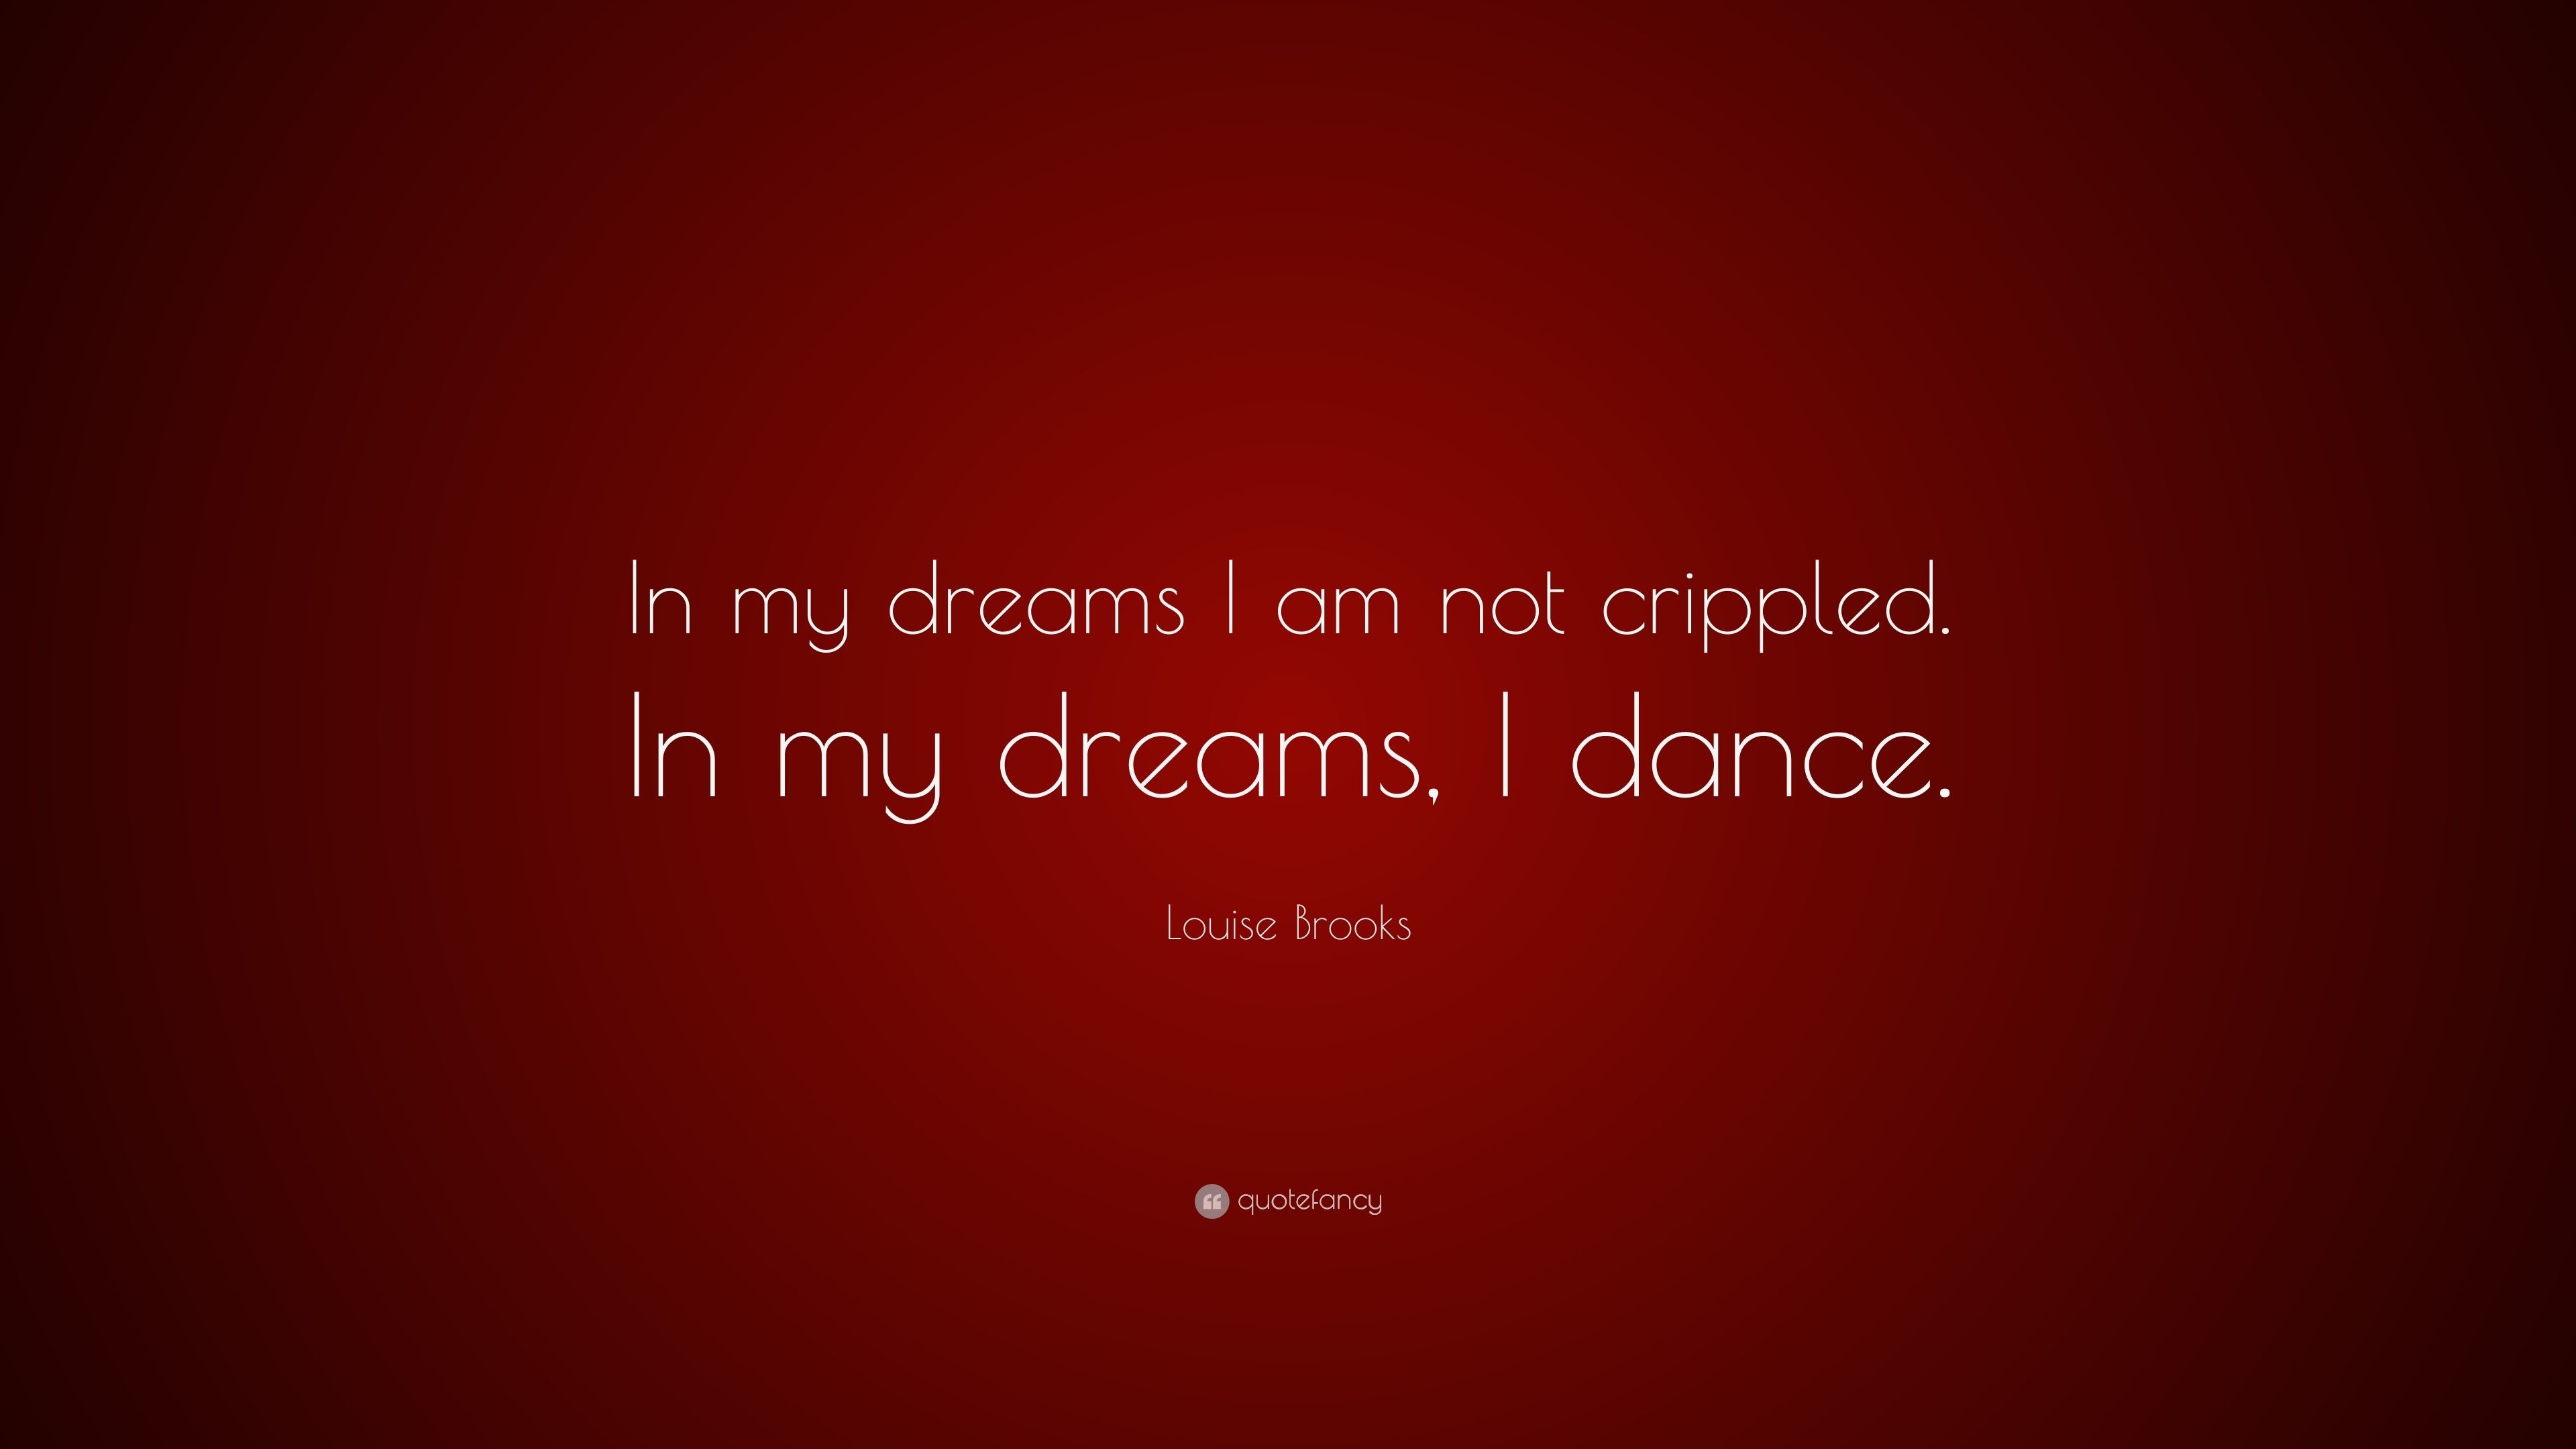 3840x2160 Louise Brooks Quote: “In my dreams I am not crippled. In my dreams